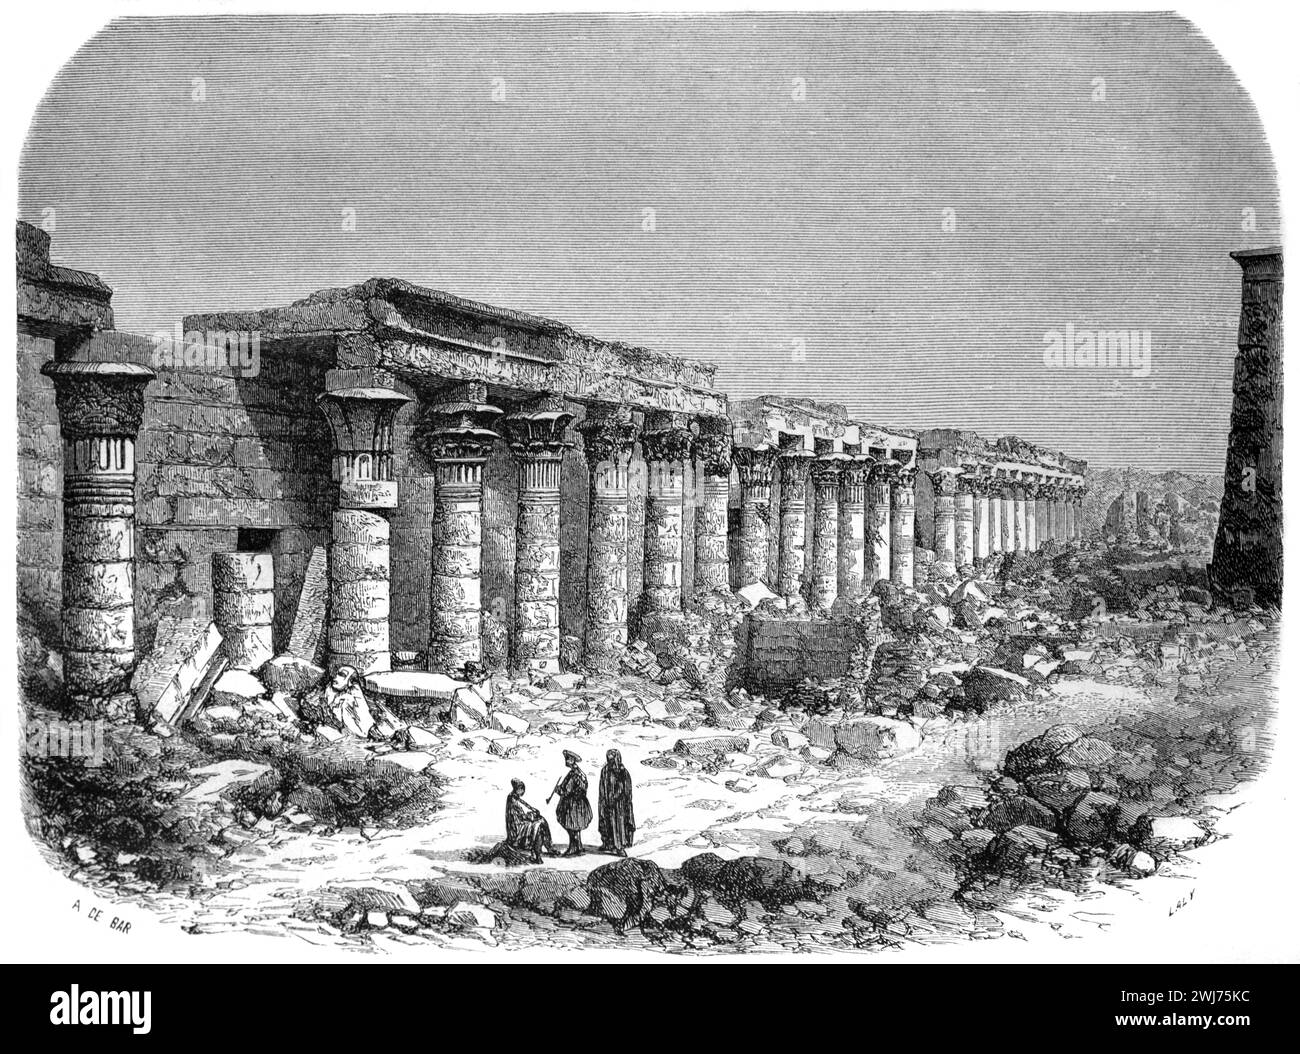 Philae Temple Complex, Aswan, Nubia, Egypt. Vintage or Historic Engraving or Illustration 1863 Stock Photo